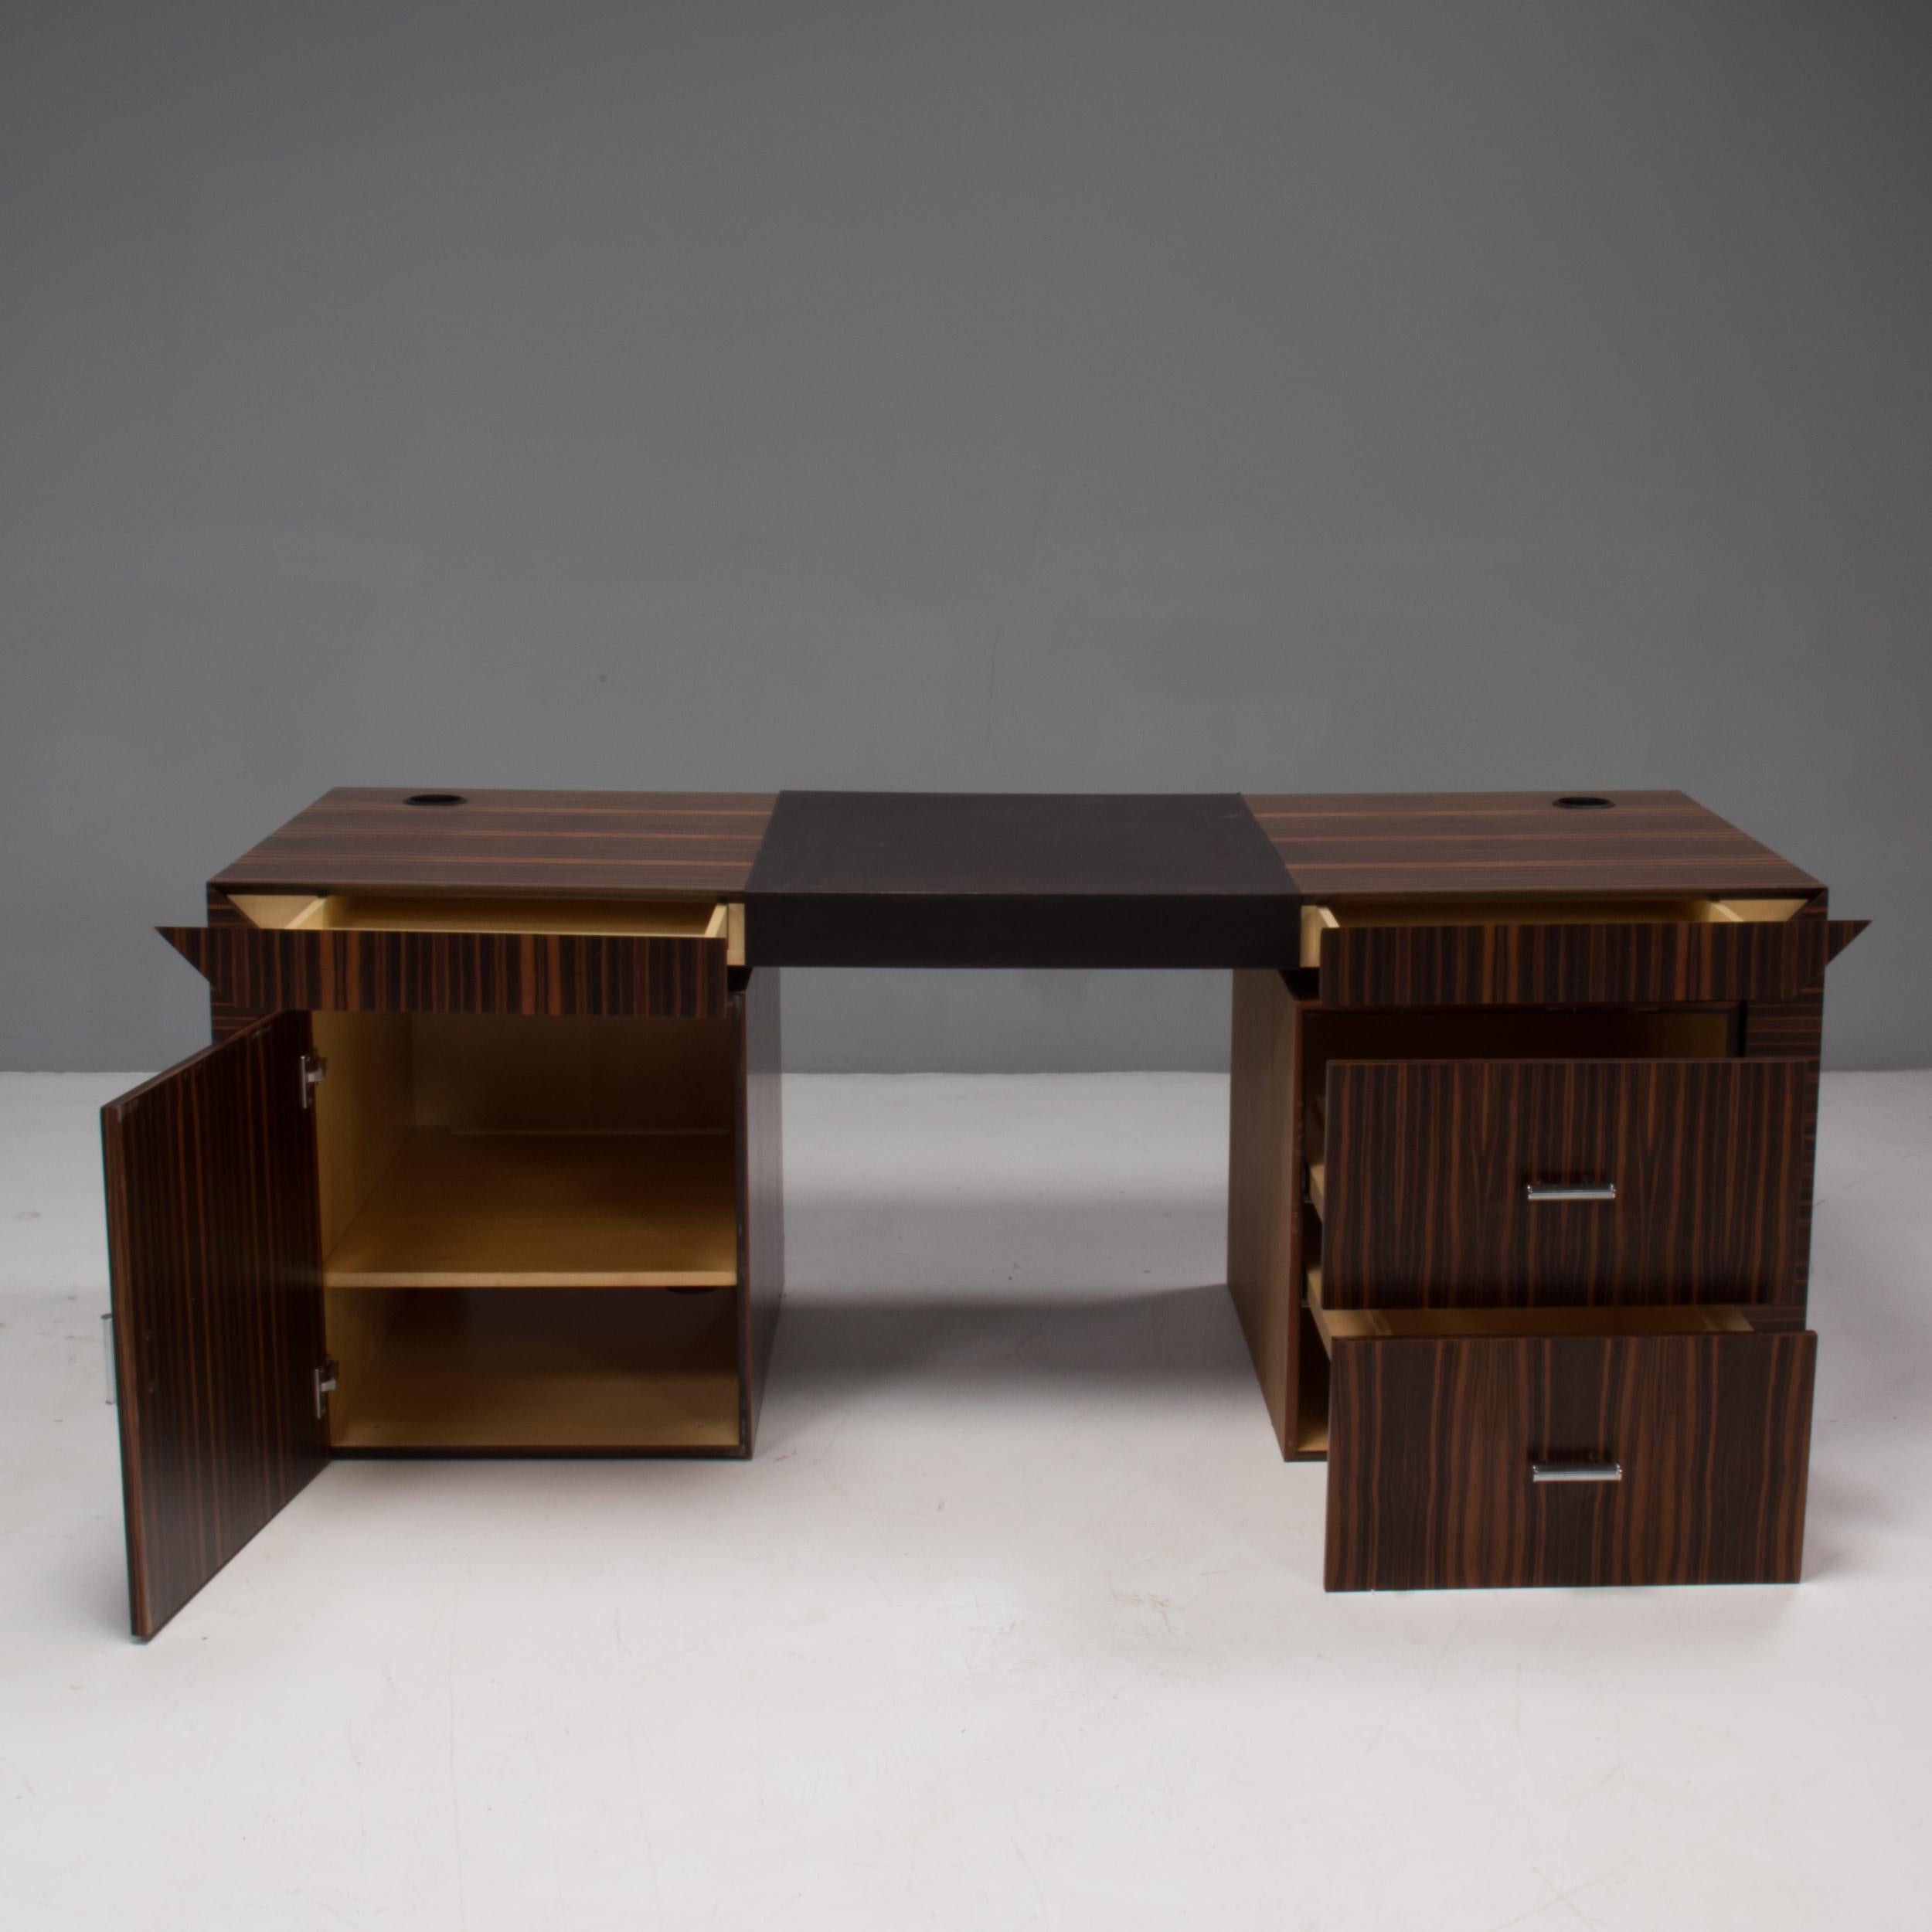 Beautifully constructed, this vintage Poliform desk is a timeless piece of Italian design.

Constructed from wood, the desk has an angular frame, enhanced by the striped wood veneer which complements the linear shape, finished with contrasting